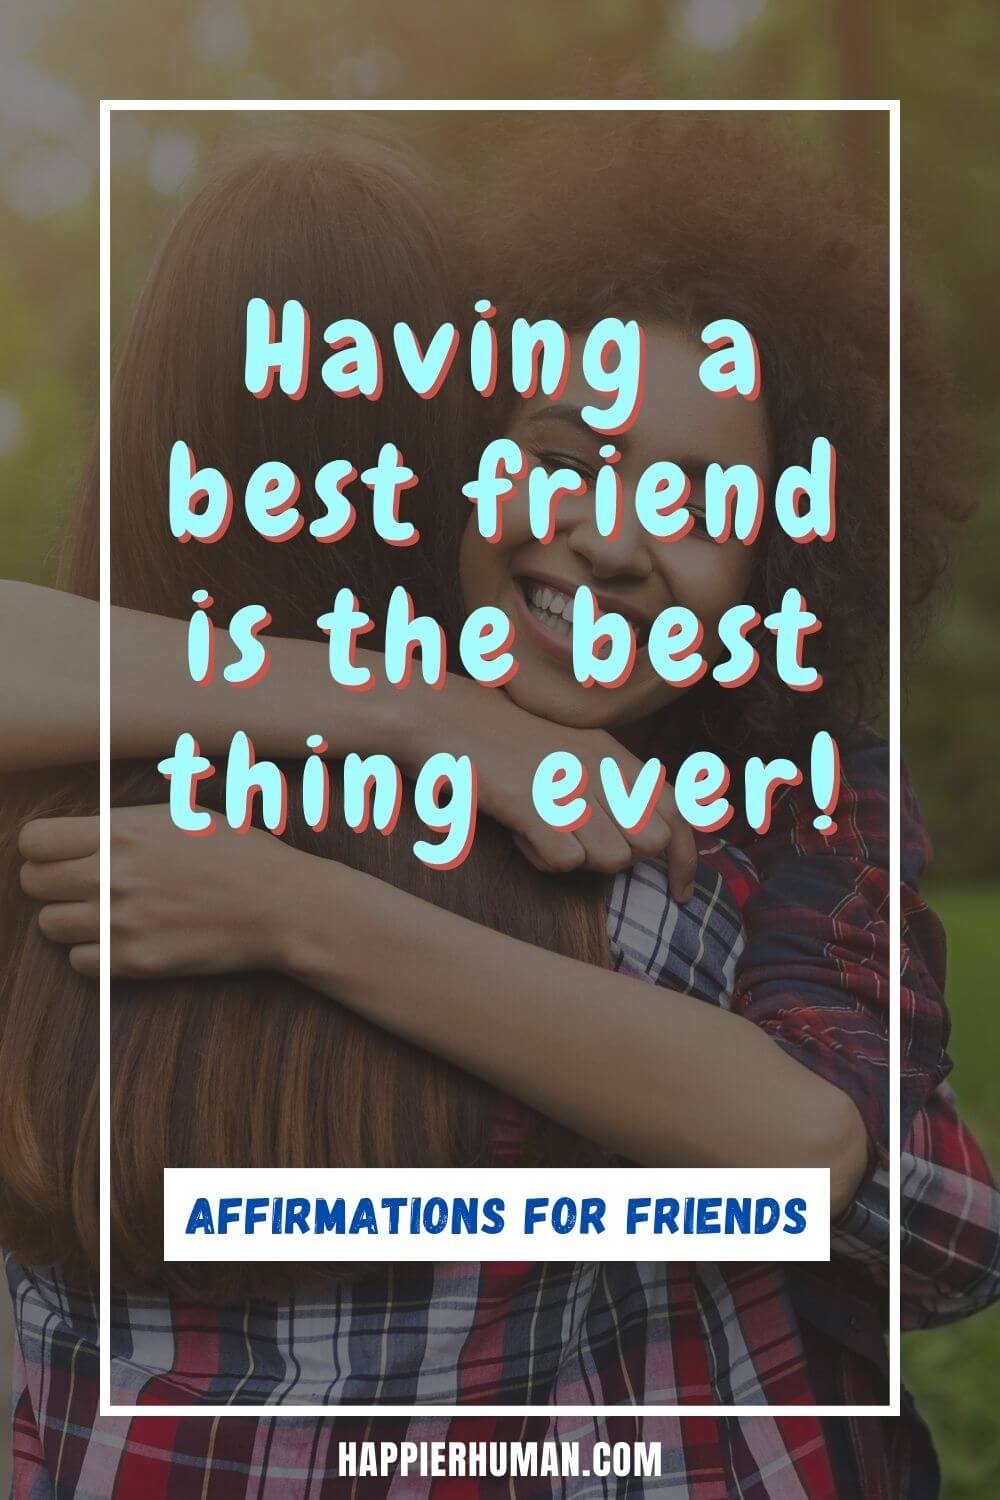 Affirmations for Friends - Having a best friend is the best thing ever! | short positive affirmations for friends | affirmations for friends and family | daily affirmations for friends